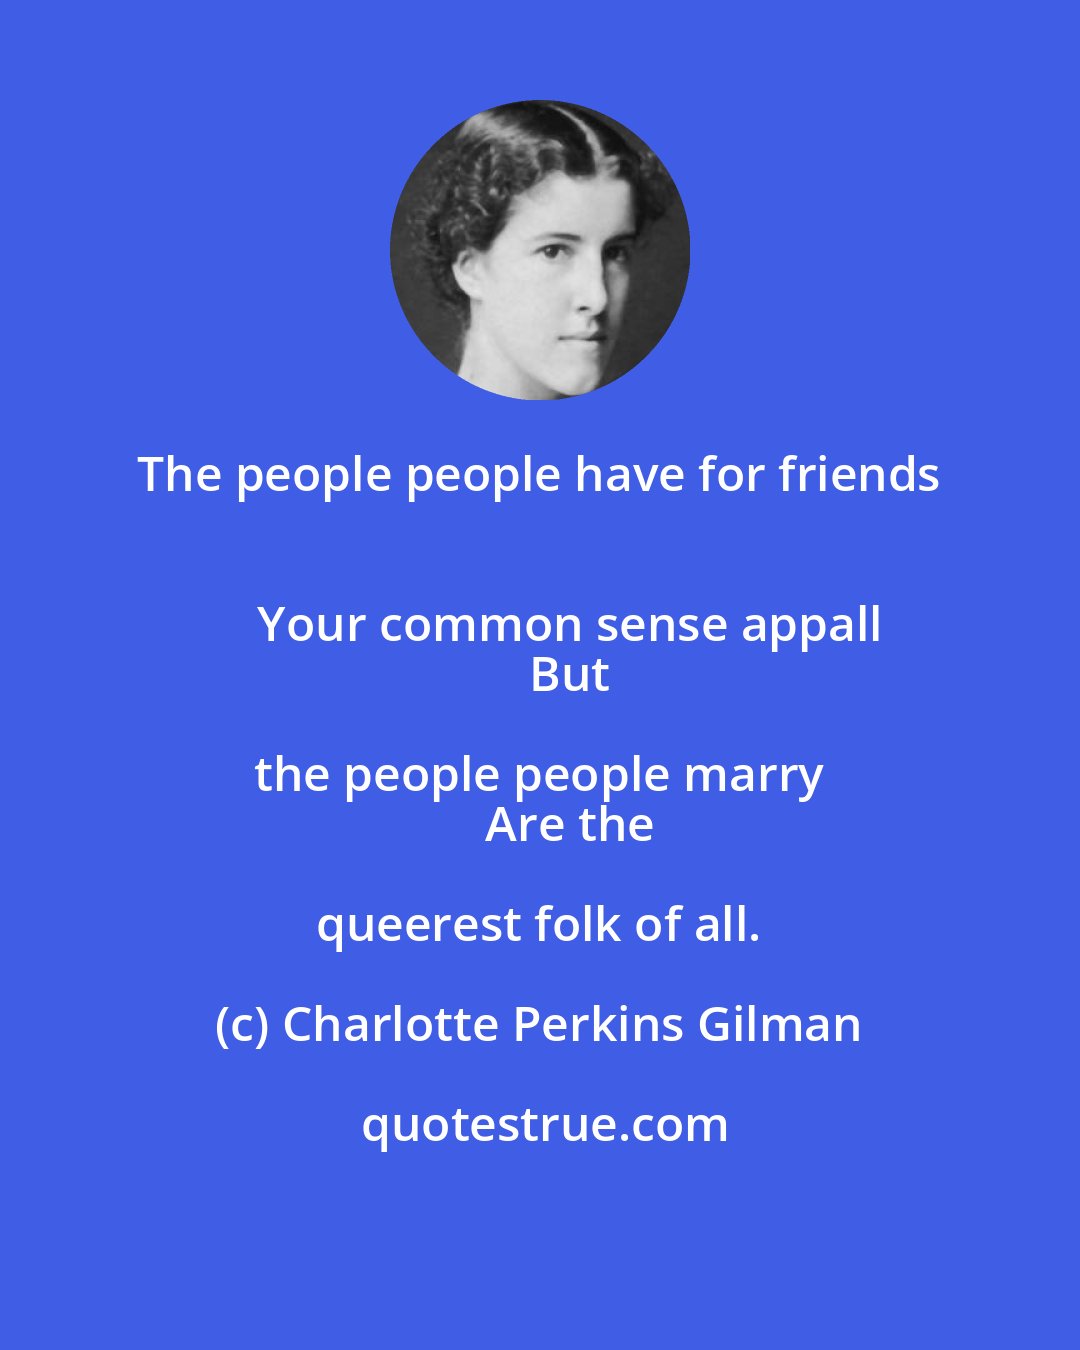 Charlotte Perkins Gilman: The people people have for friends 
      Your common sense appall 
      But the people people marry 
      Are the queerest folk of all.